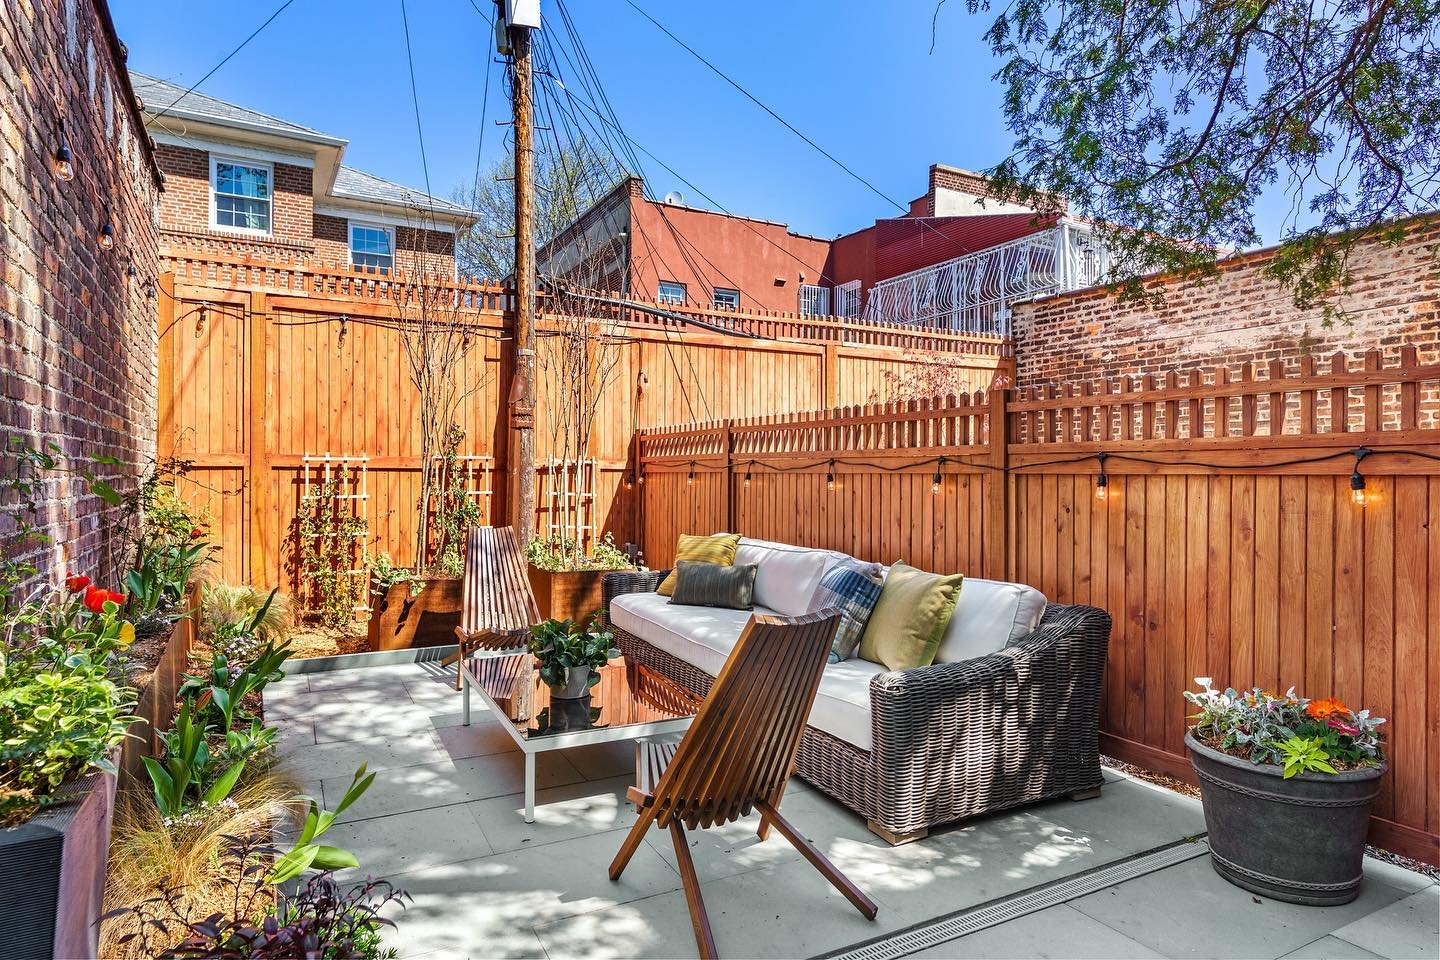 This just in from @michael_petrosino and team 📸😍

Spring is upon us, which means outdoor staging galore!! Let&rsquo;s take advantage of your patios, sun decks, rooftops, all ☀️

109 Midwood was such a fun and BRIGHT space. We brought in our own sun